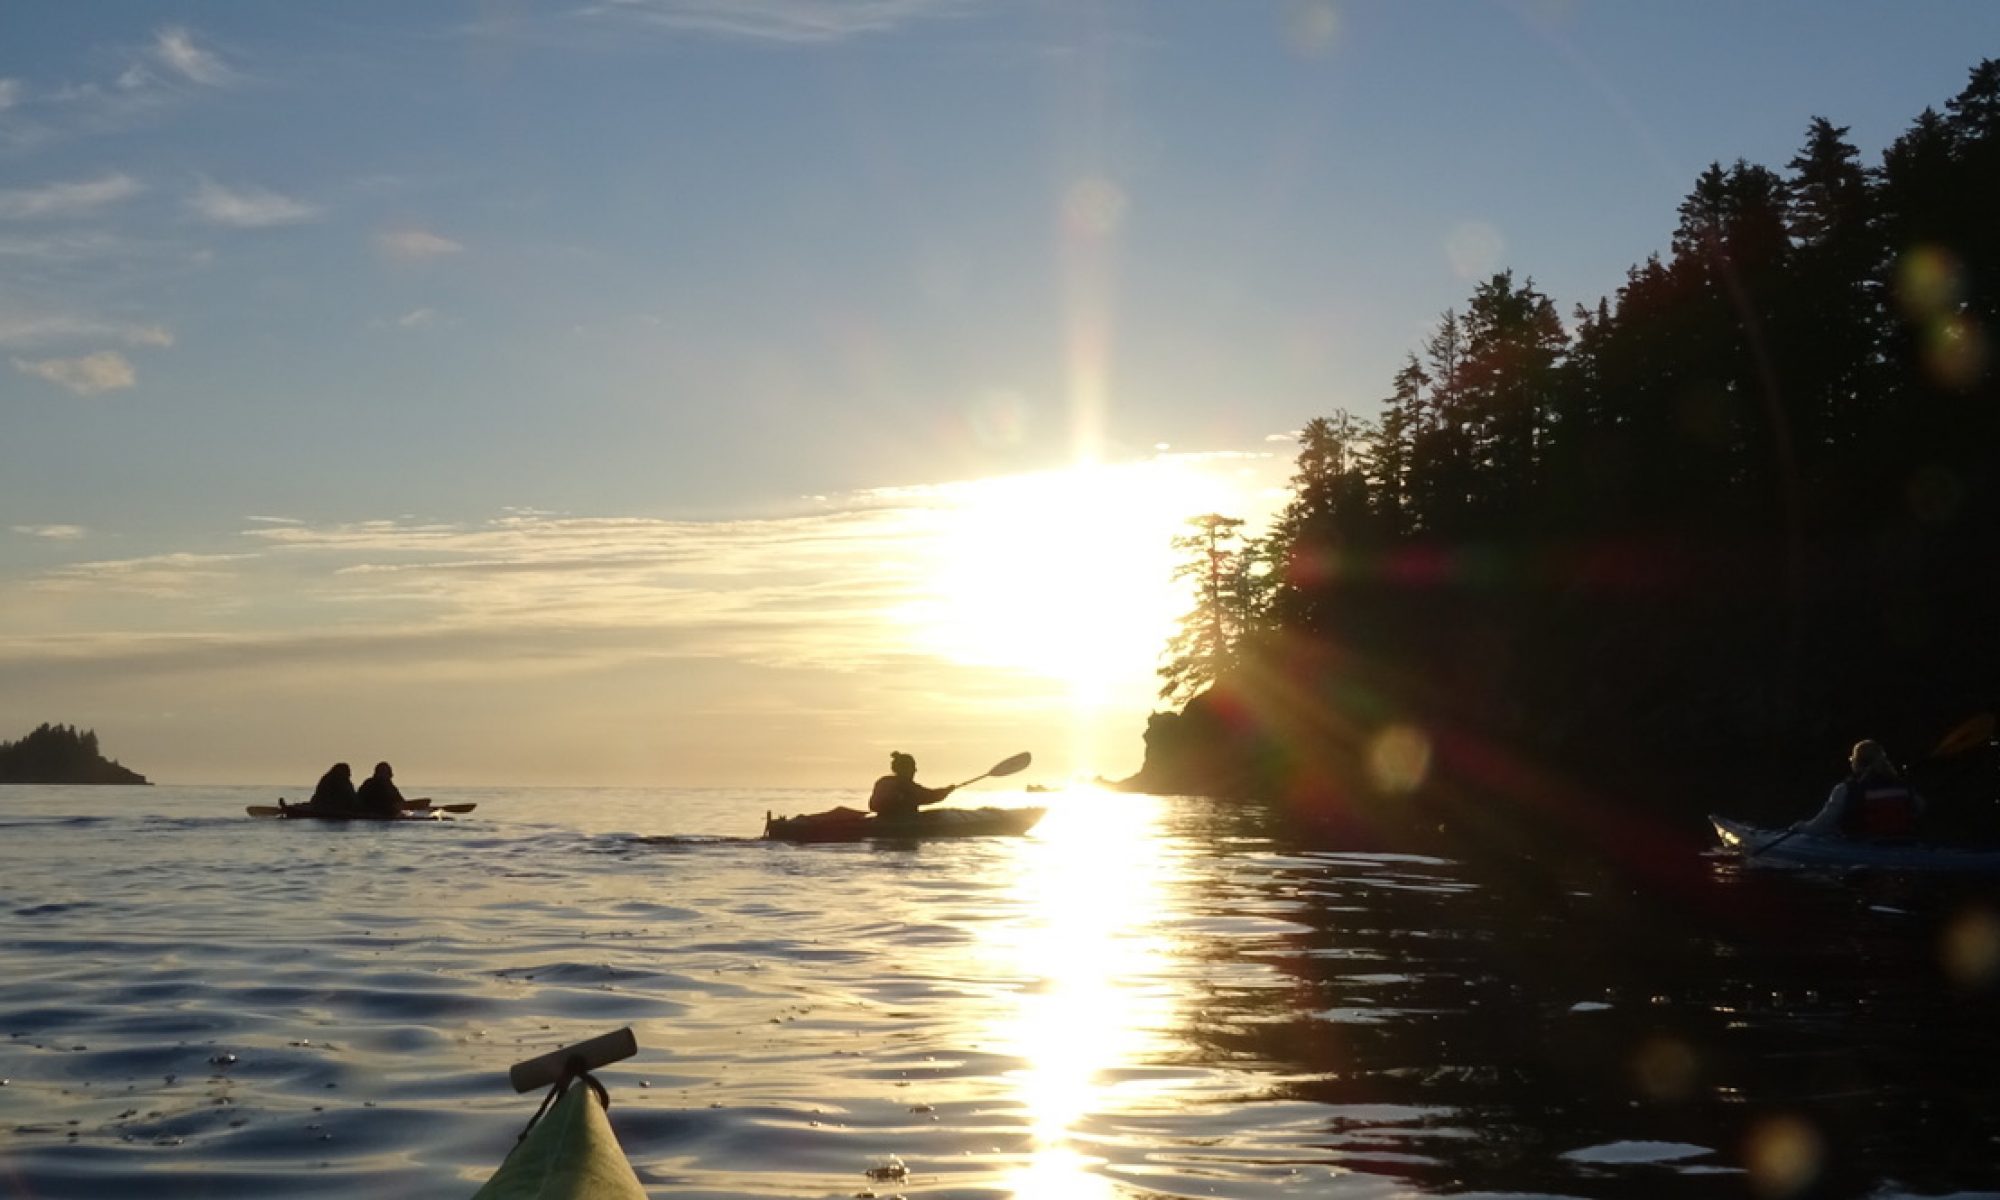 Kayakers paddling in the ocean with a sunset.